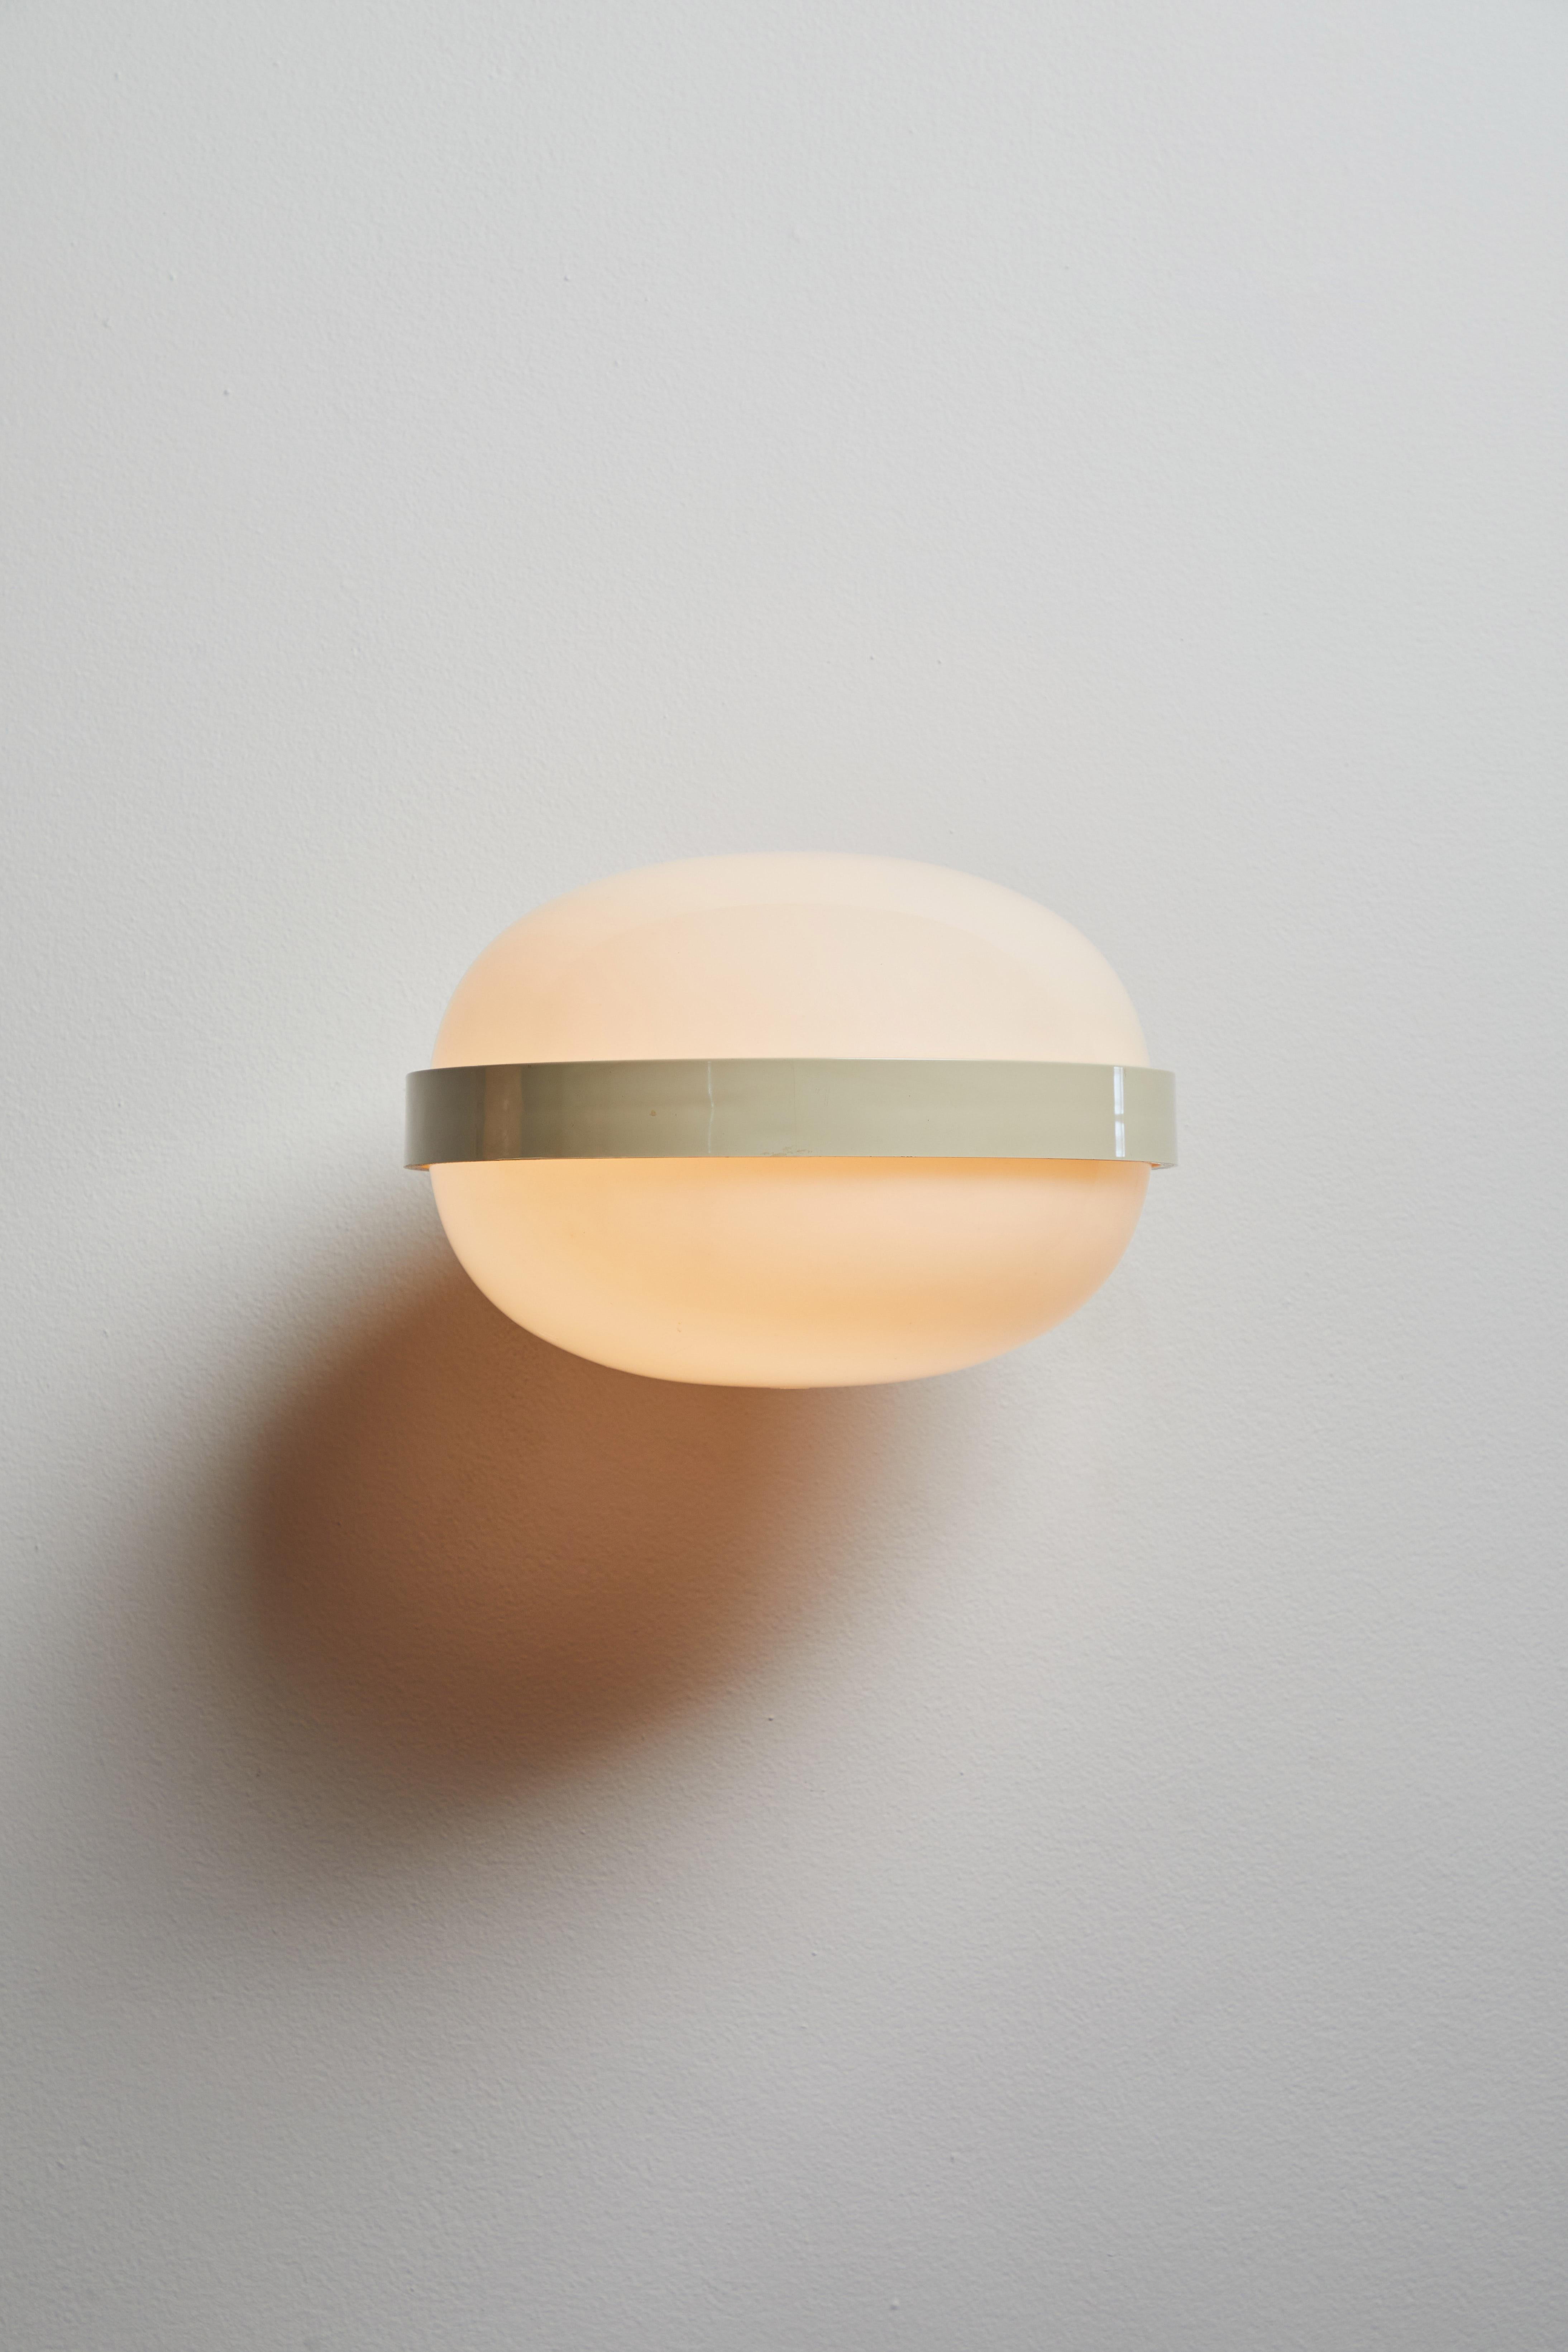 Lacquered Single Sconce by Gianemilio Piero & Anna Monti for Kartell